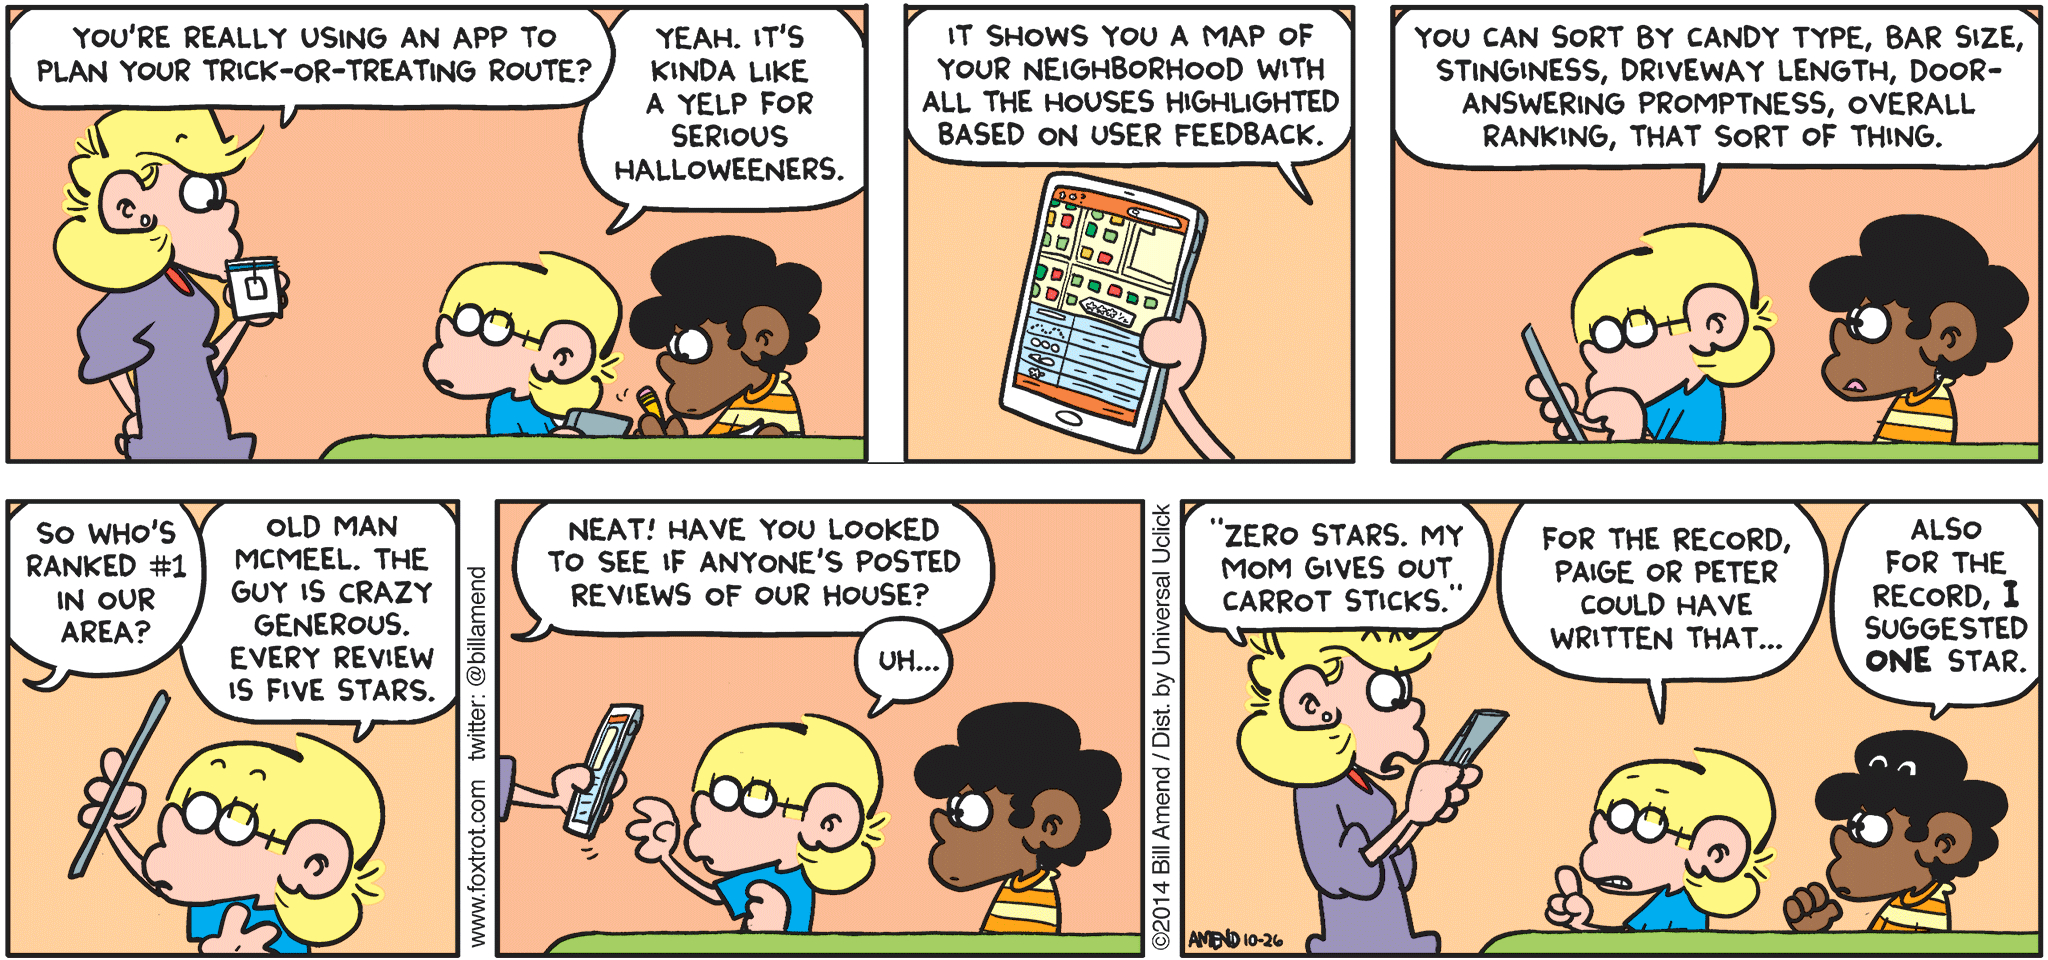 Halloween Comics - FoxTrot by Bill Amend - "Route Vegetables" published October 26, 2014 - Andy: You're really using an app to plan your trick-or-treating route? Jason: Yeah. It's kinda like a Yelp for serious Halloweeners. Jason: It shows you a map of your neighborhood with all the houses highlighted based on user feedback. You can sort by candy type, bar size, stinginess, driveway length, door-answering proptness, overall ranking, that sort of thing. Andy: So who's ranked #1 in our area? Jason: Old man McMeel. The guys is crazy generous. Every review is five stars. Andy: Neatt! Have you looked to see if anyone's posted reviews of our house? Jason: Uh... Andy: "Zero stars. My mom gives out carrot sticks." Jason: For the record, Paige or Peter could have written that... Marcus: Also for the record, I suggested ONE star.